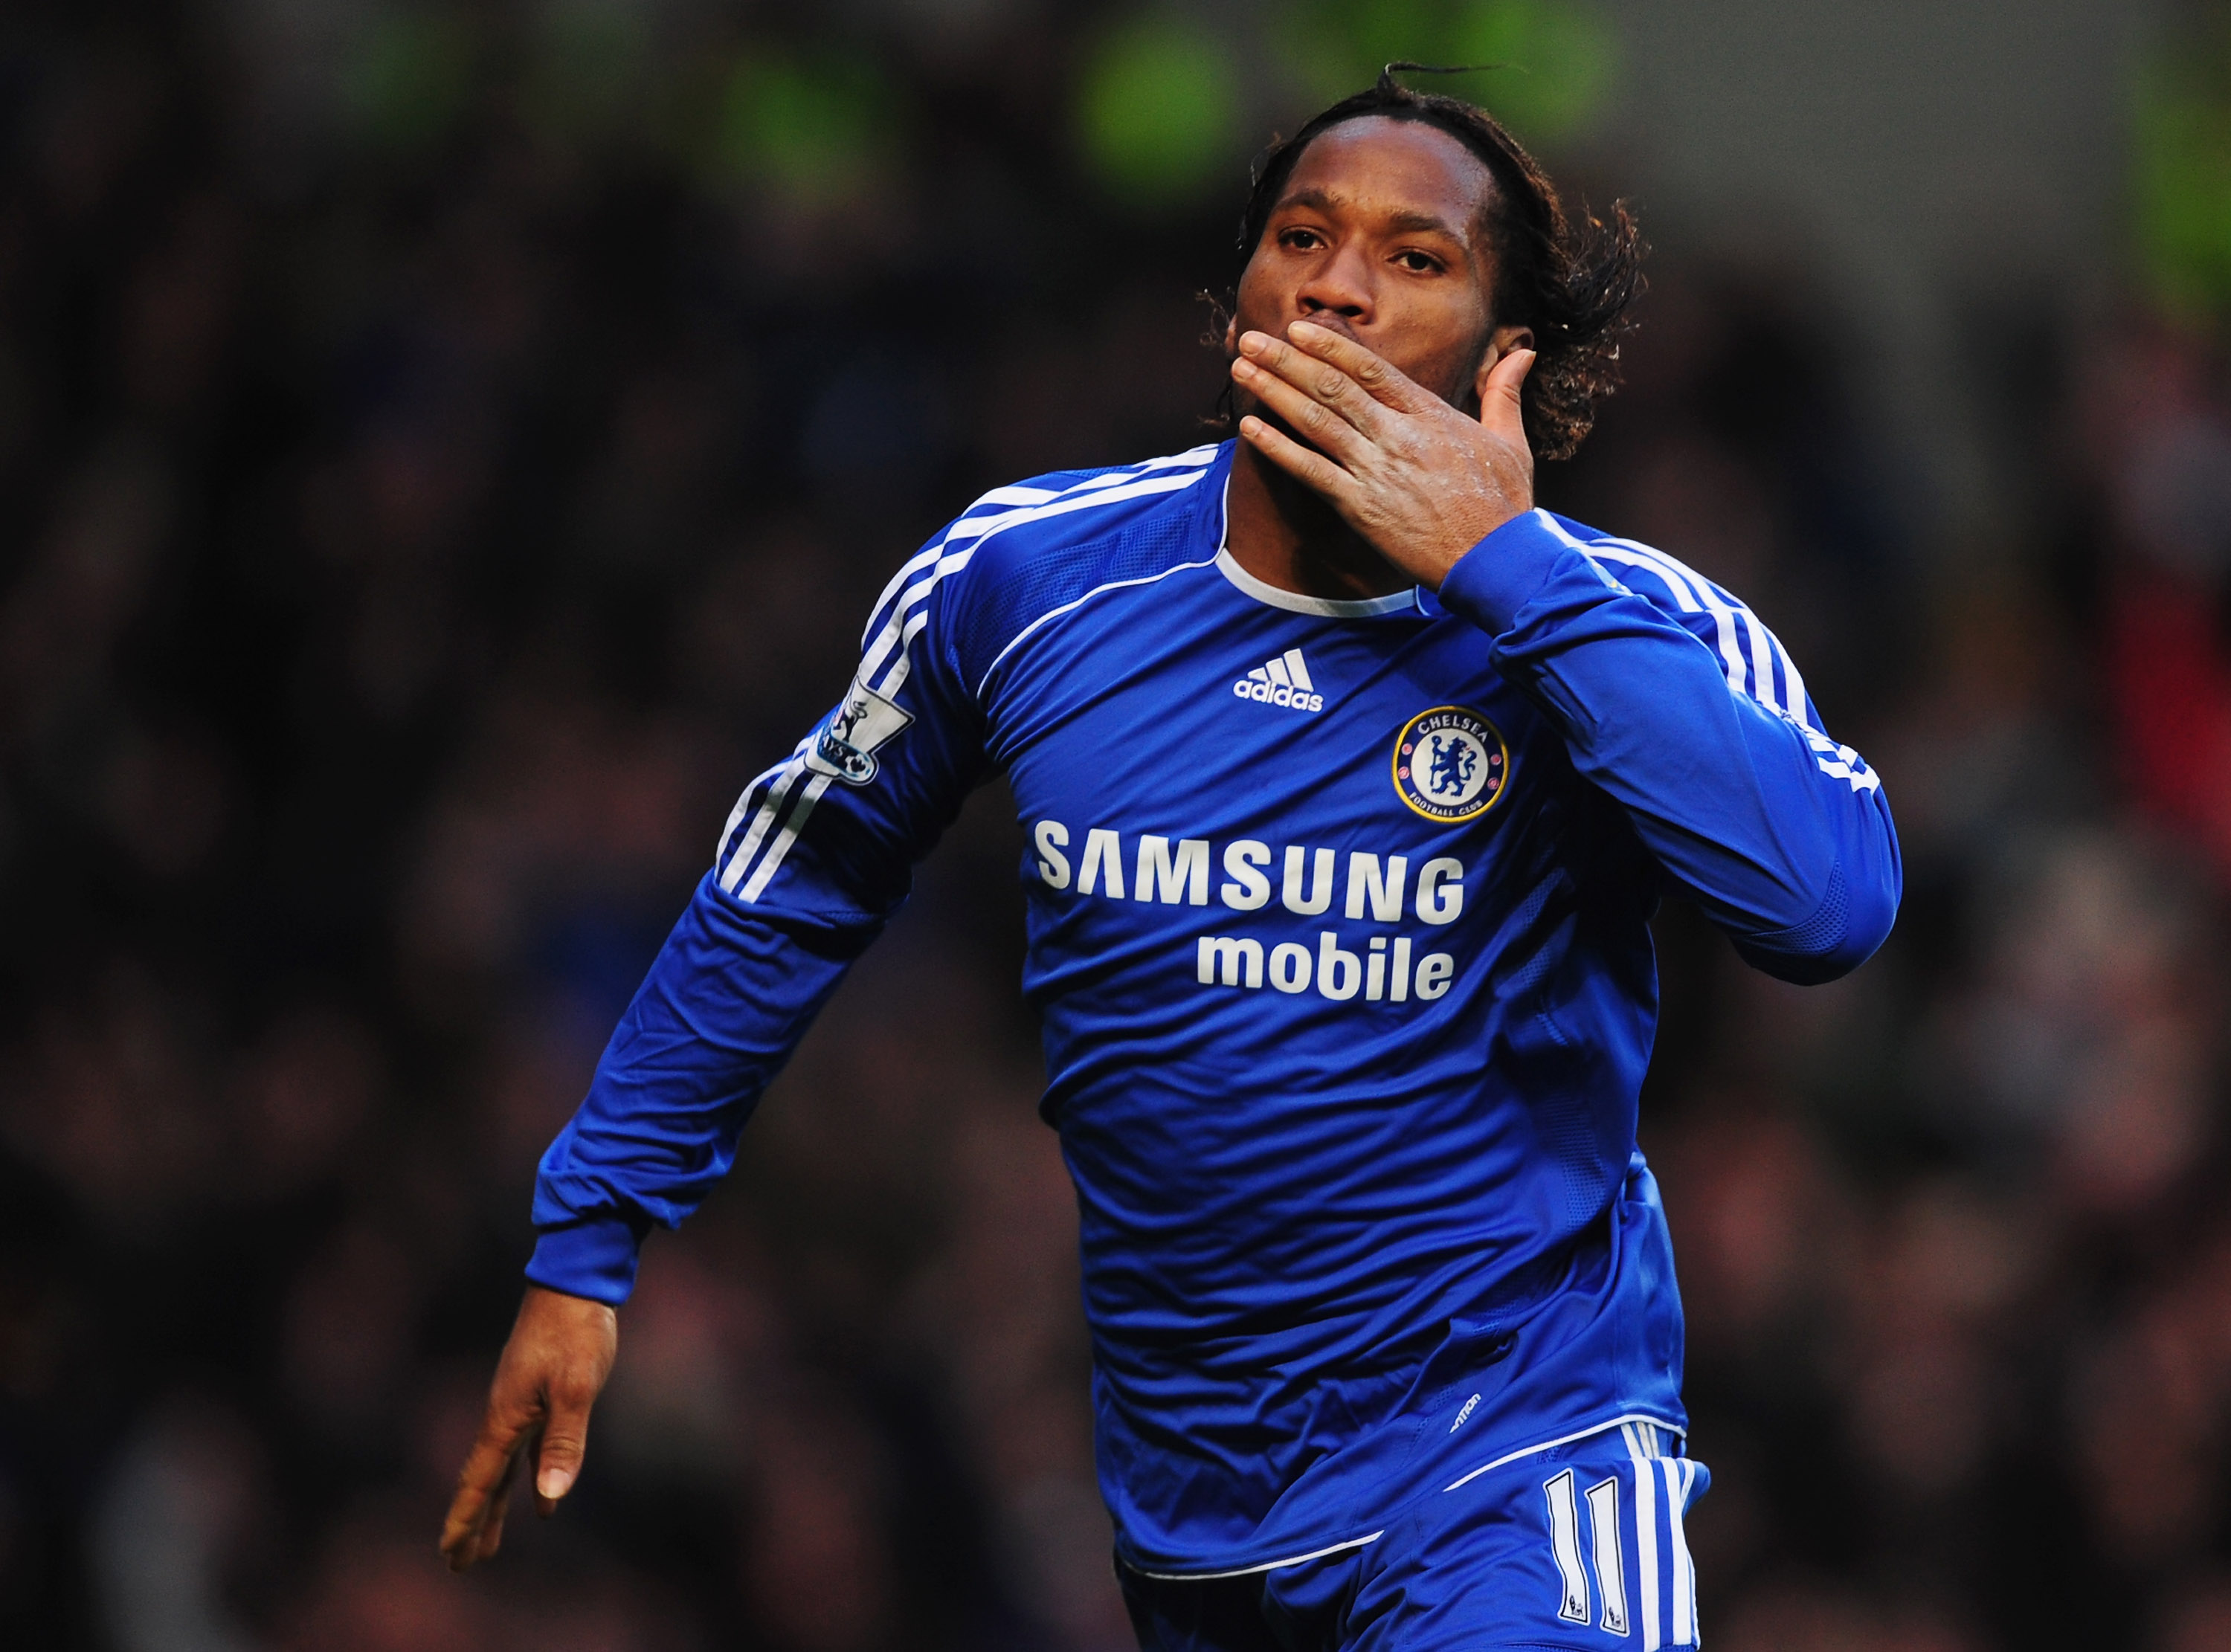 LONDON - MARCH 23:  Didier Drogba of Chelsea celebrates as he scores their second goal during the Barclays Premier League match between Chelsea and Arsenal at Stamford Bridge on March 23, 2008 in London, England.  (Photo by Shaun Botterill/Getty Images)